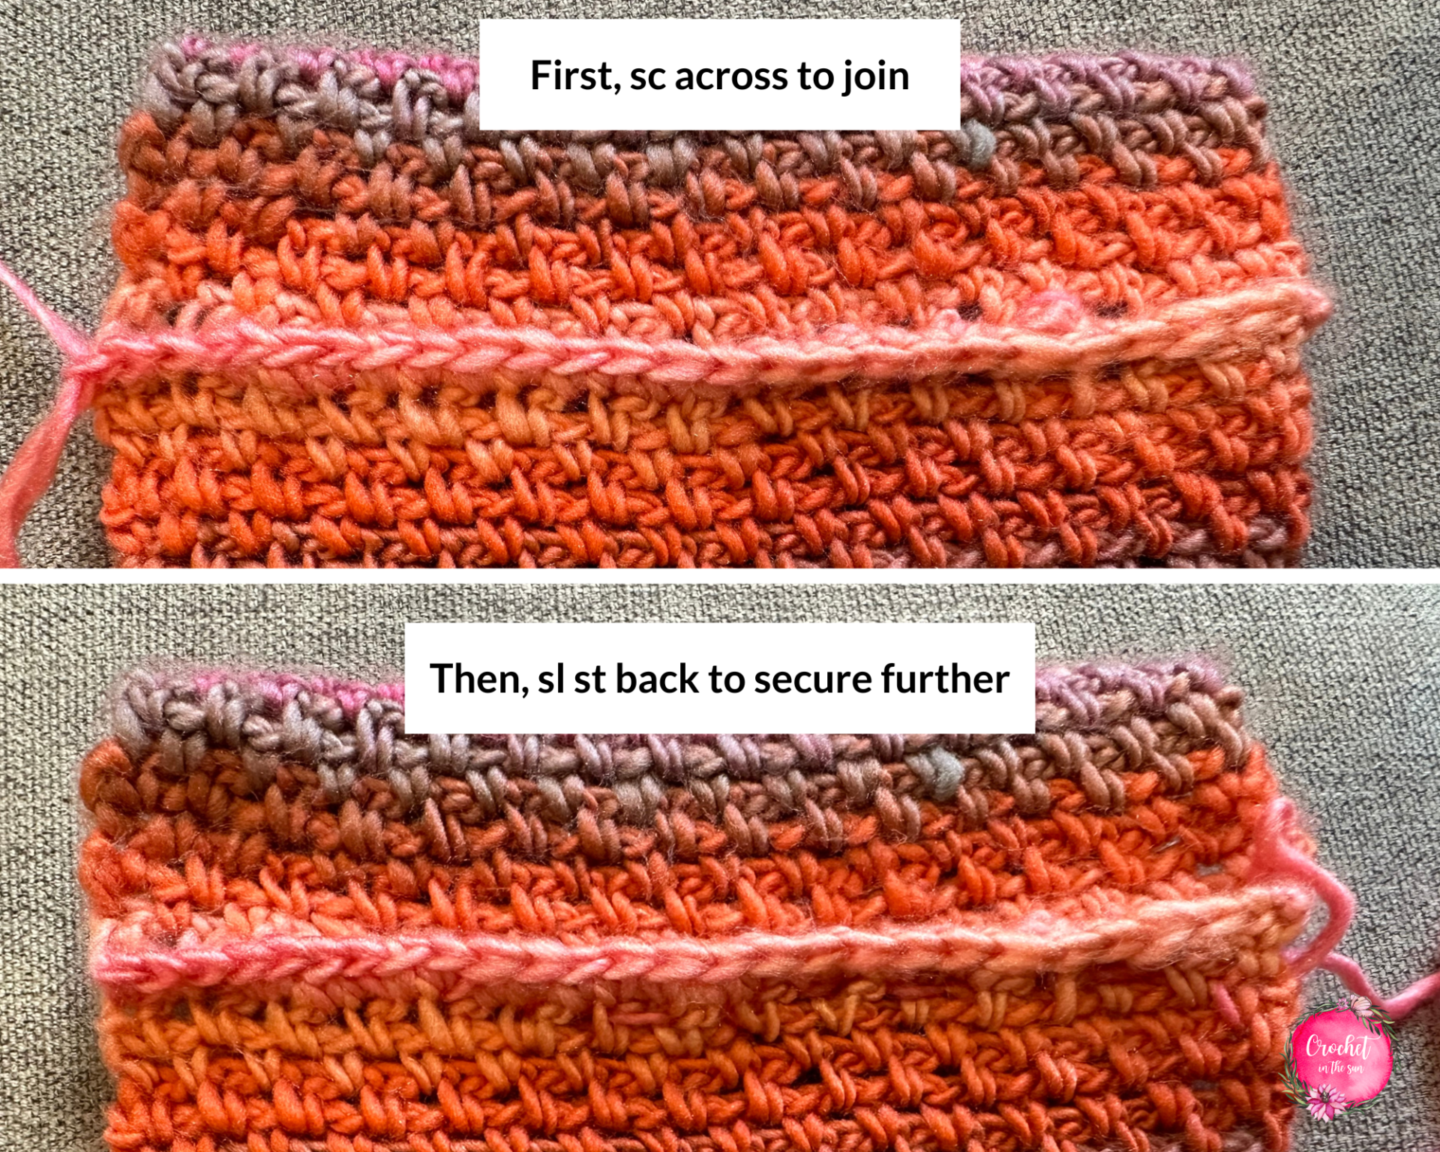 Uluru Sunset scarf pattern - here is what it looks like after you join twice across. Free and easy crochet scarf pattern